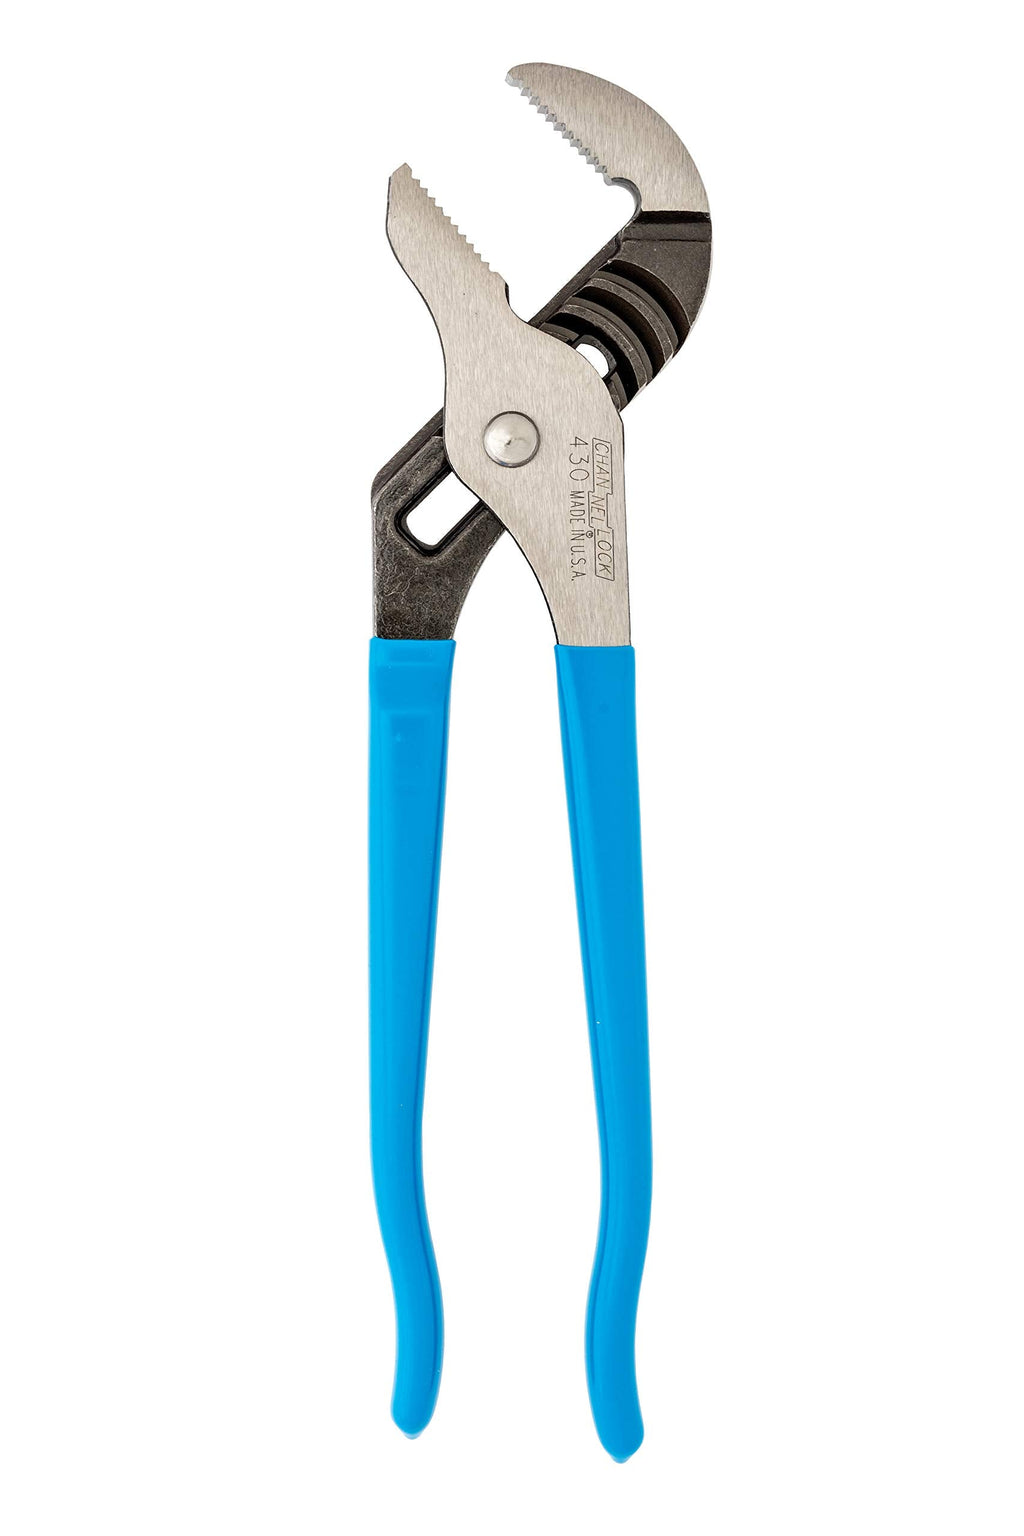 [Australia - AusPower] - Channellock 430 Tongue & Groove Pliers | 10" Straight Jaw Groove Joint Plier with Comfort Grips | 2" Jaw Capacity | Laser Heat-Treated 90° Teeth| Forged From High Carbon Steel | Made In USA,Black, Blue, Silver,10-Inch 